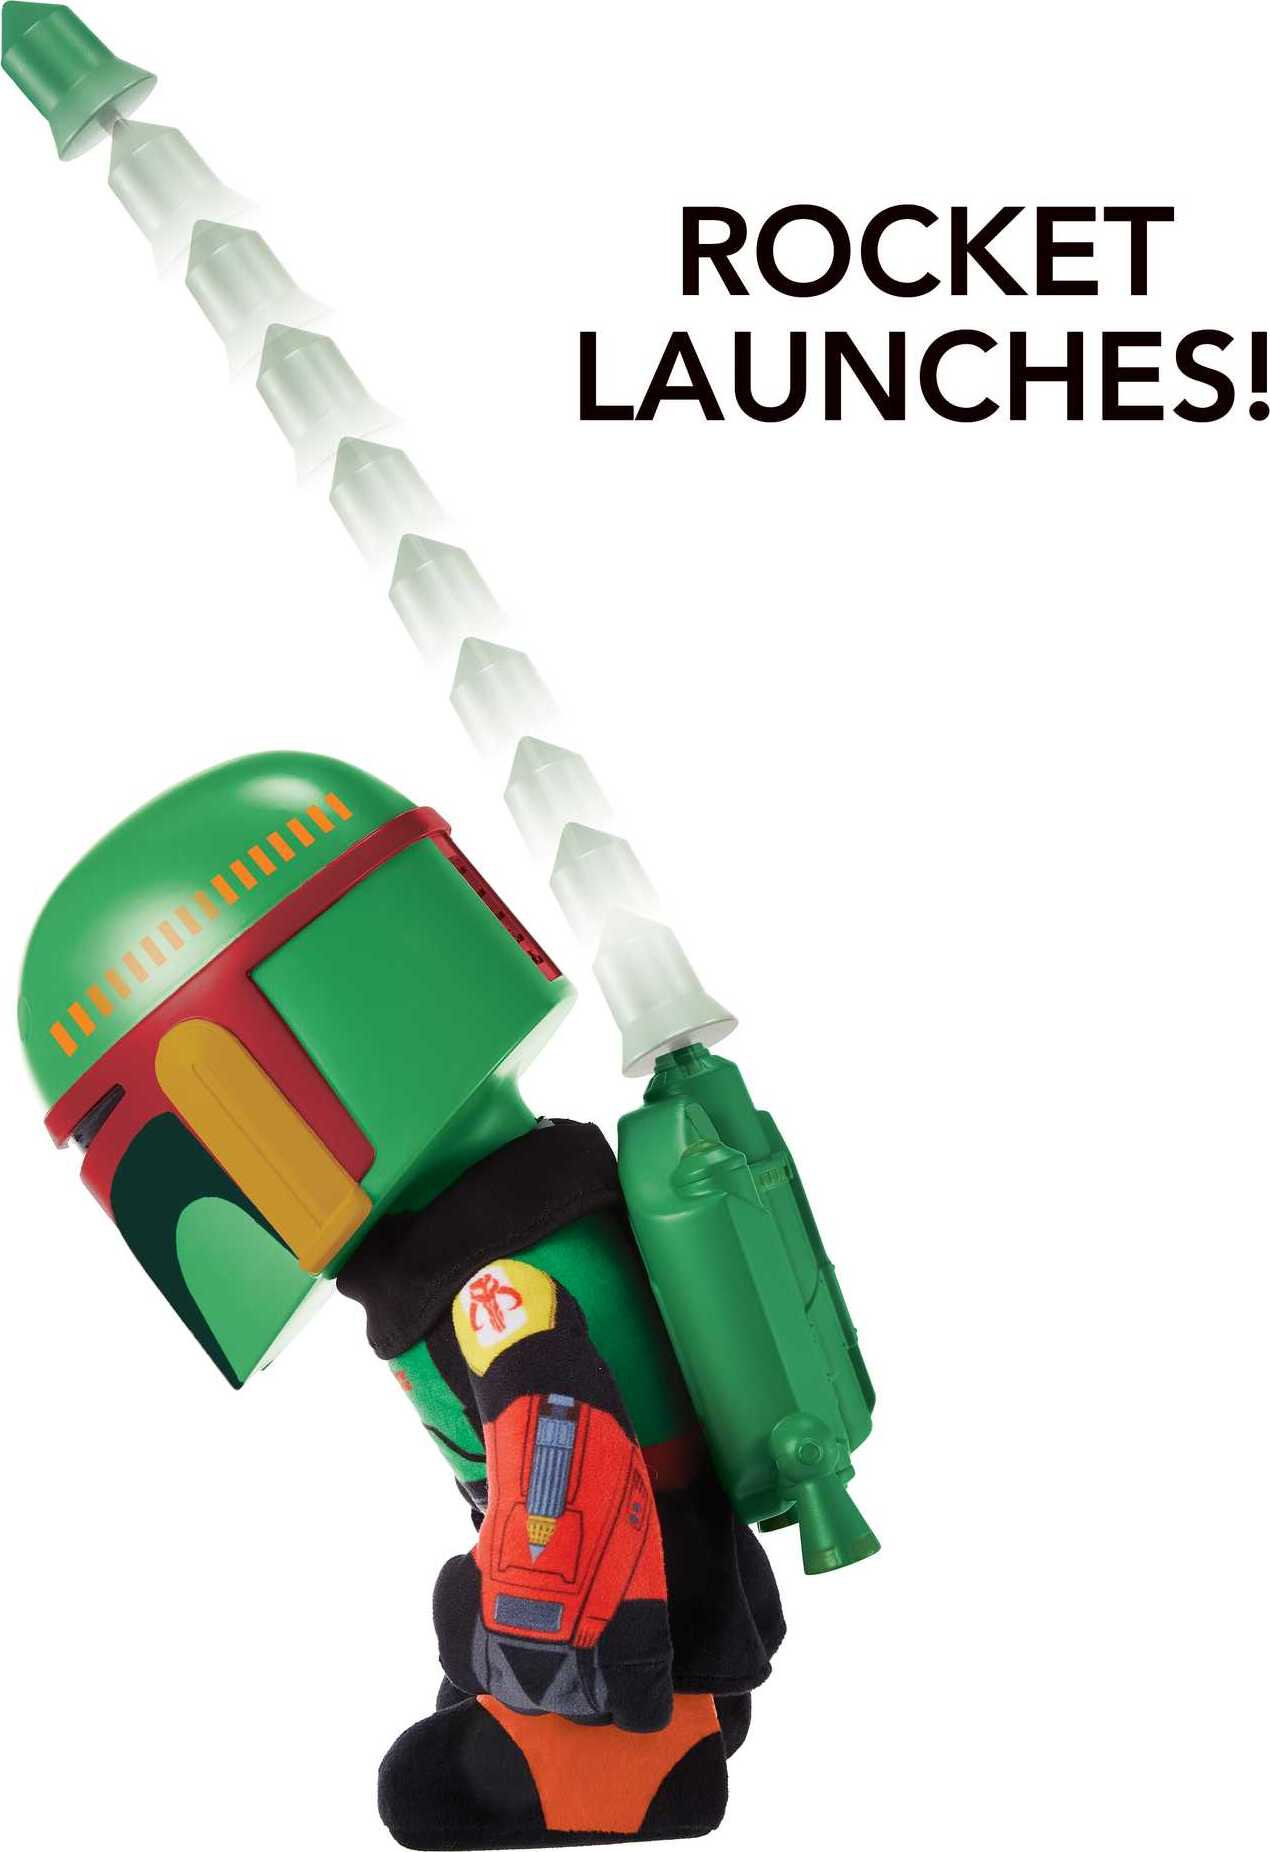 Star Wars Boba Fett Voice Cloner 12" Feature Plush with Air-Powered Soft Rocket Launcher - image 3 of 6